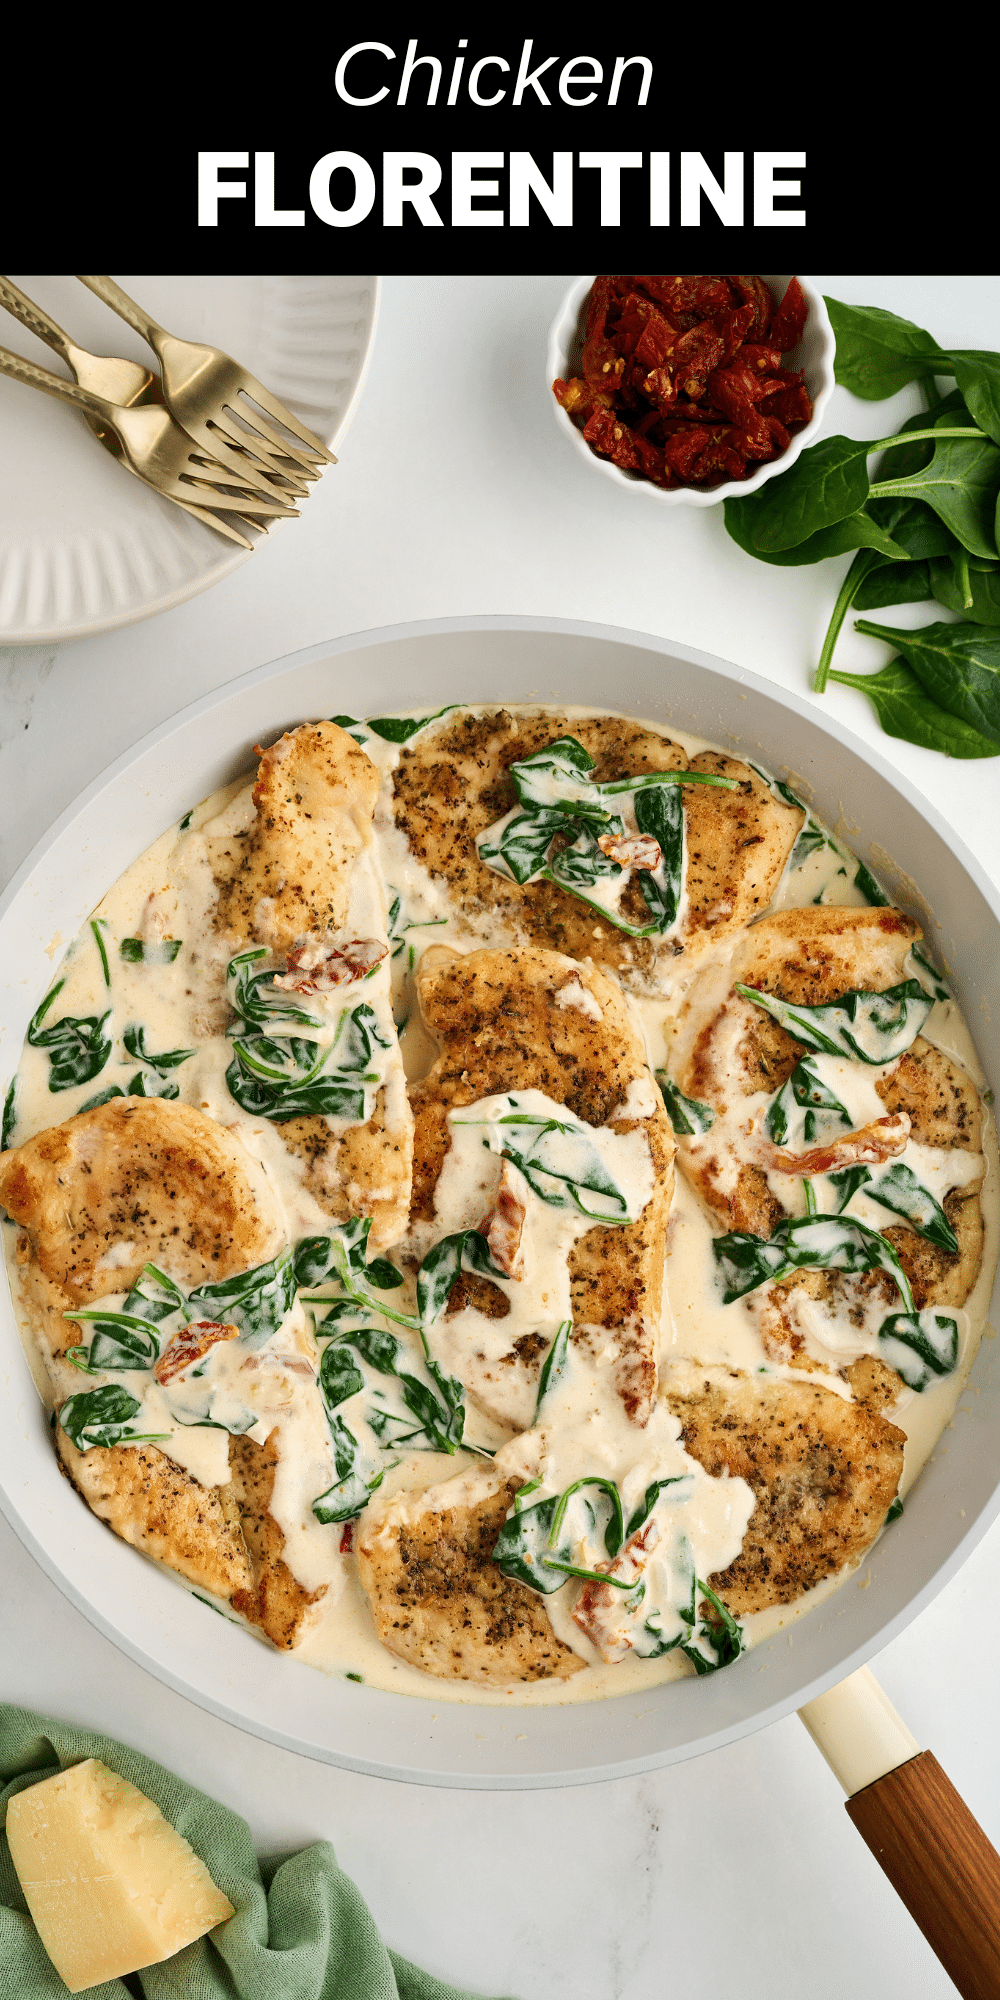 With easy-to-follow step-by-step instructions, this creamy Chicken Florentine recipe allows you to get a hearty dinner on the table in a snap. Flavorful, juicy chicken cutlets with tender spinach are simmered in a cheesy cream sauce in just 30 minutes.